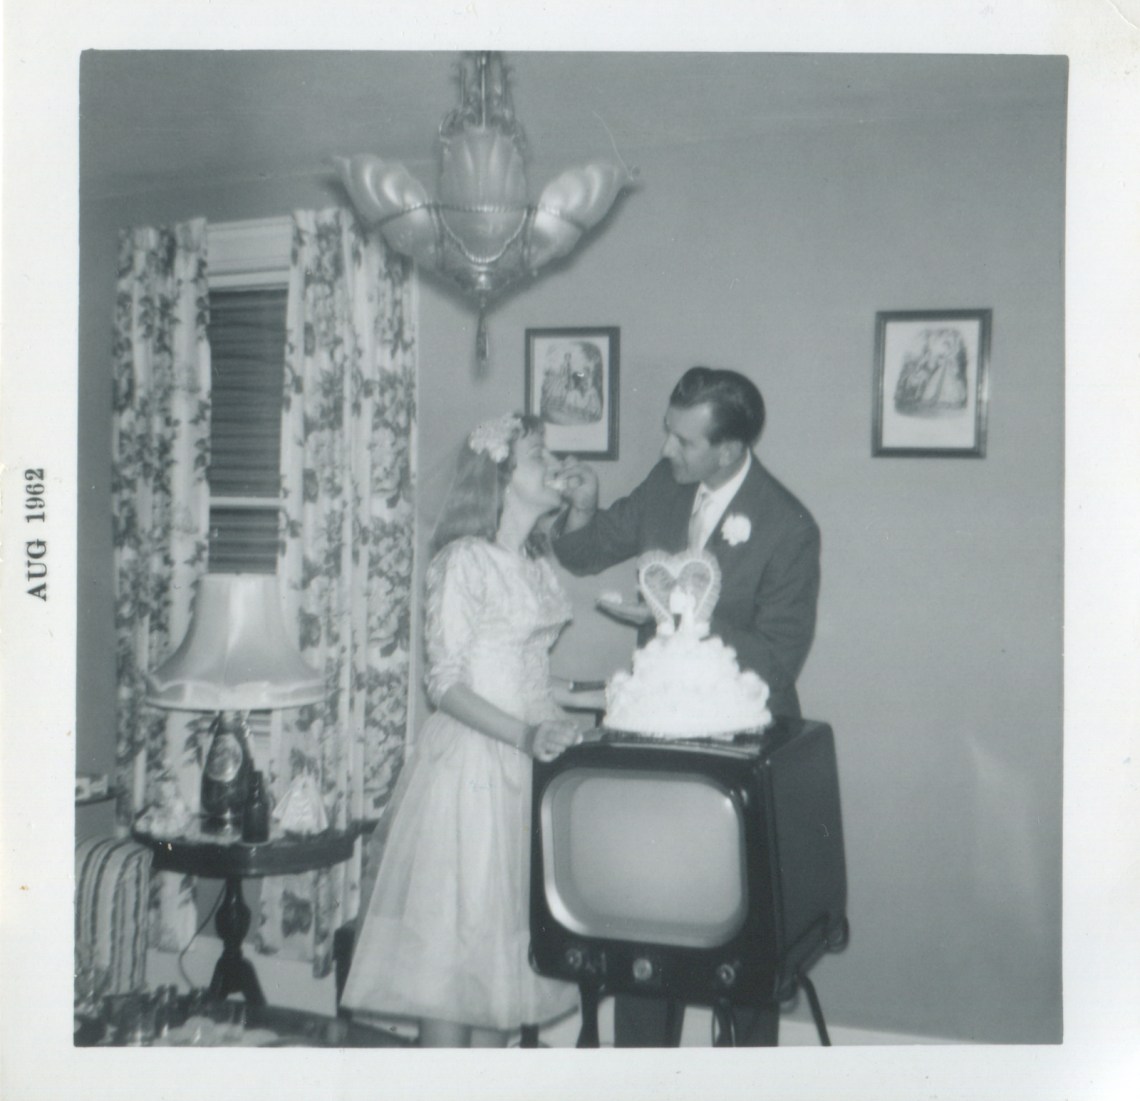 A just-married couple eating from a wedding cake atop a TV set